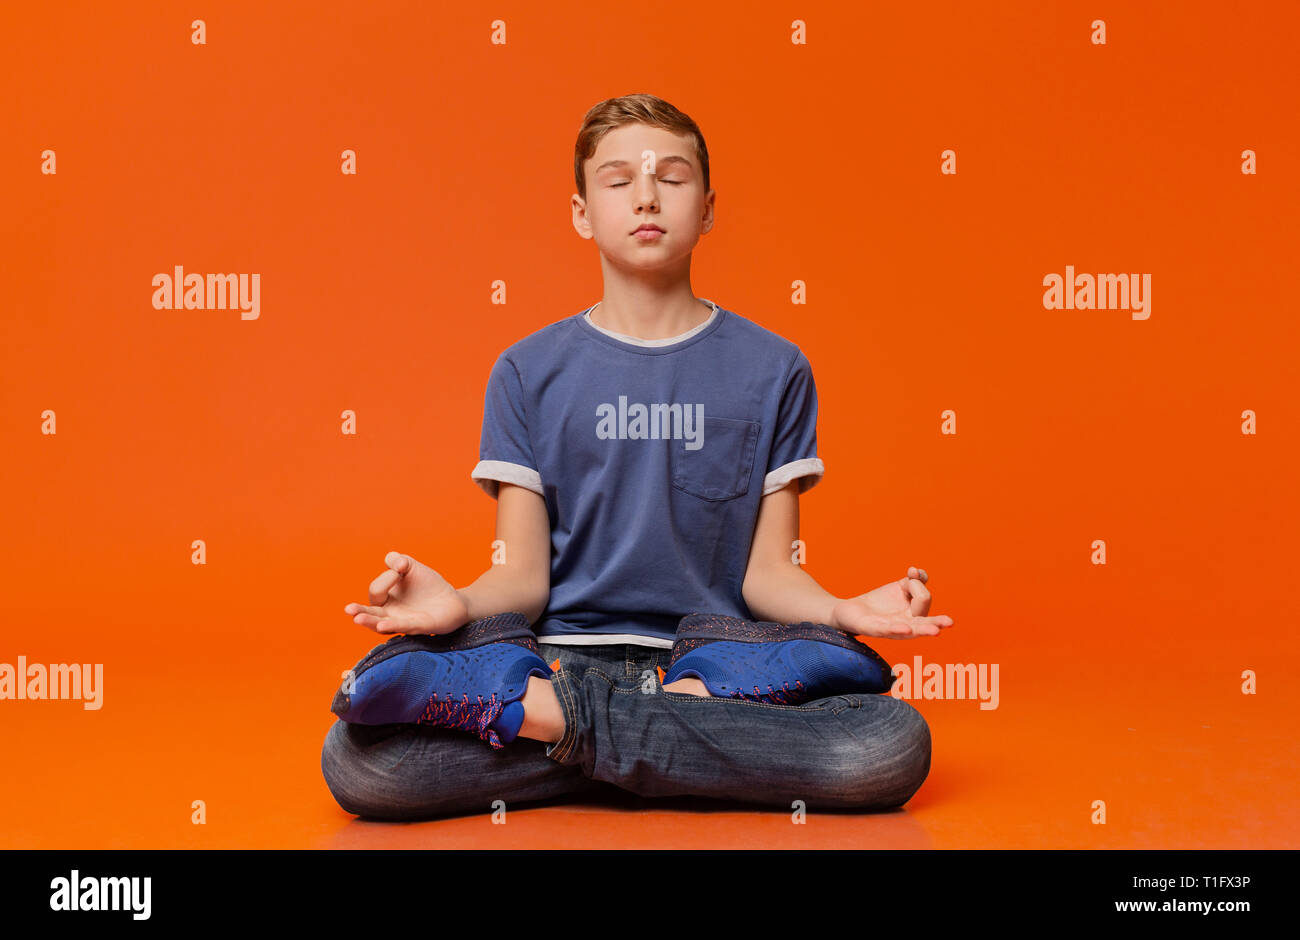 Calm boy sitting on floor and meditating in lotus position. Stock Photo